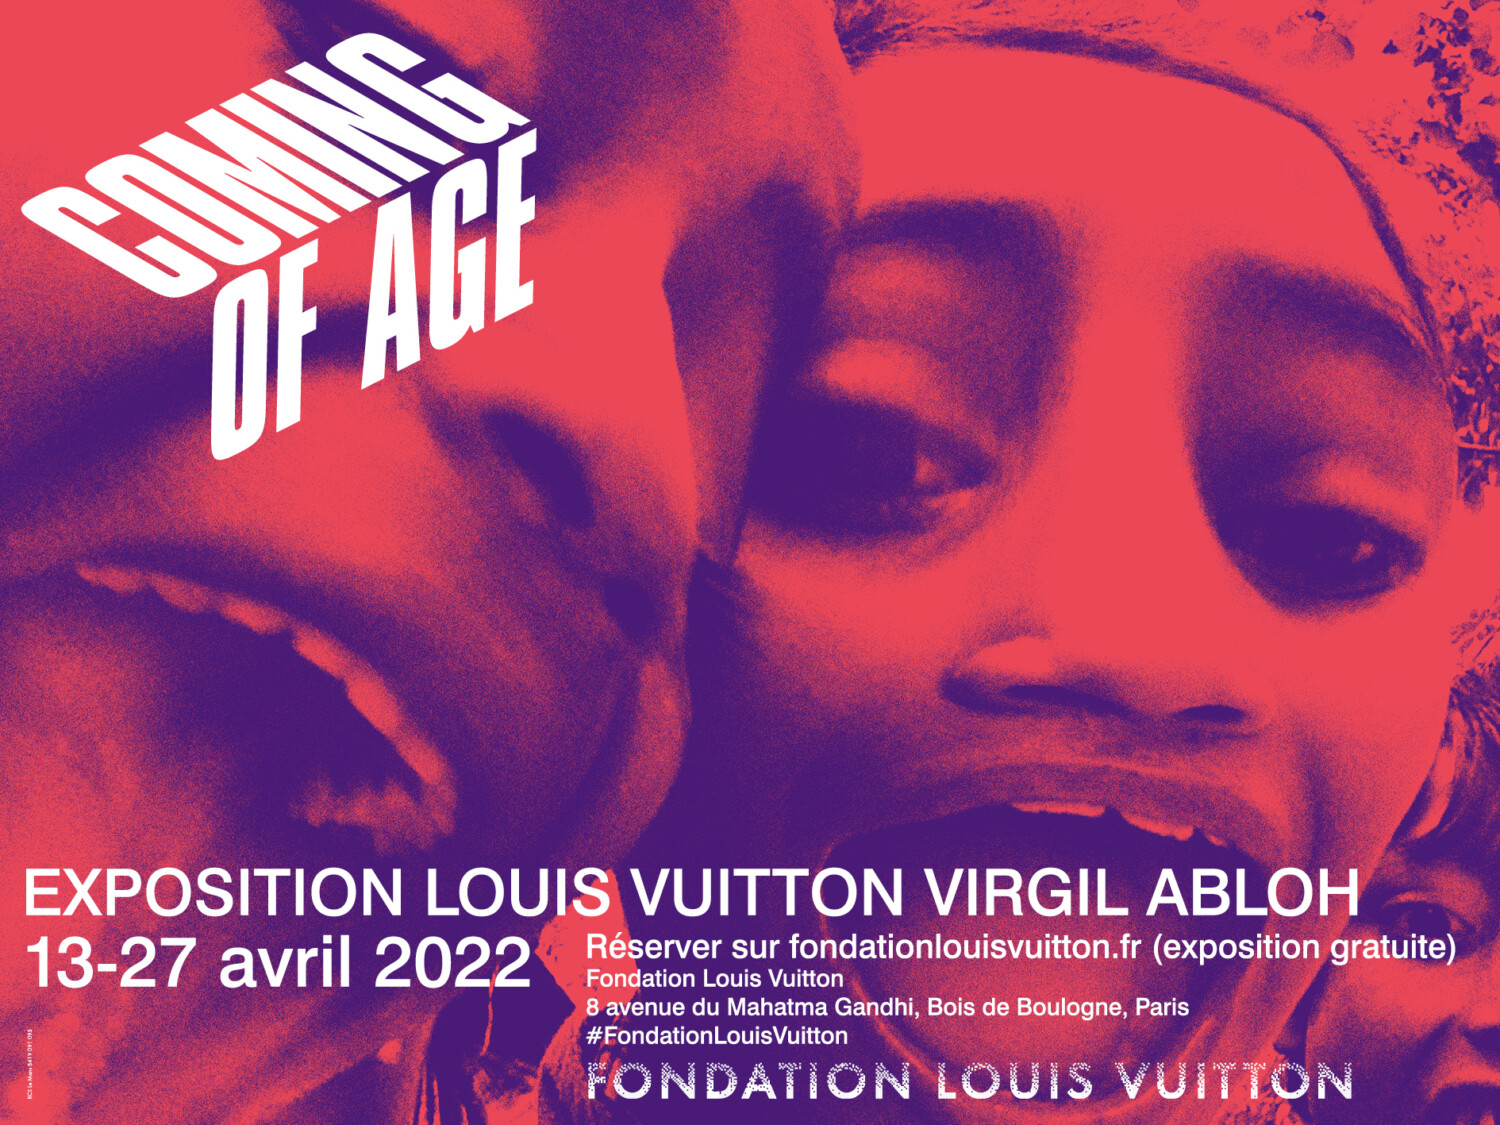 Virgil Abloh's “Coming of Age” Exhibition, presented by the Louis Vuitton  Foundation - to Be Magazine